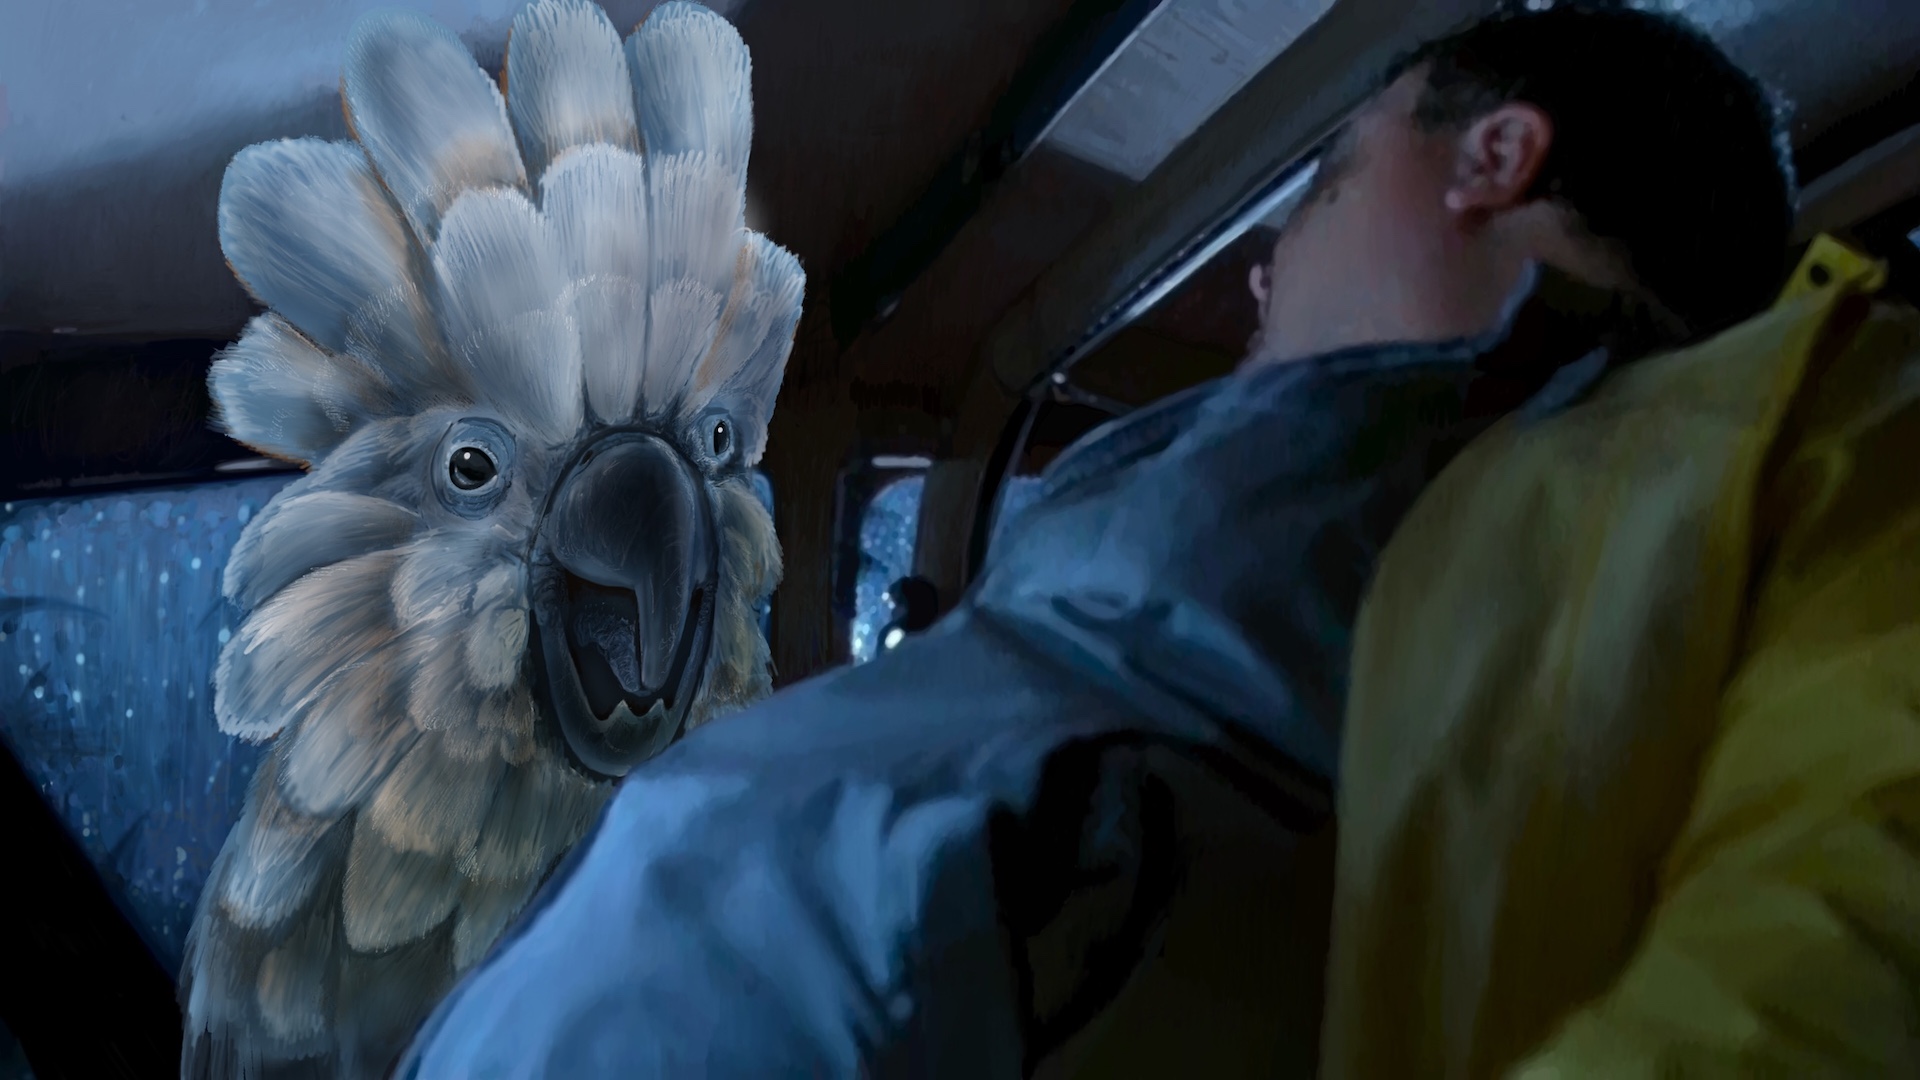 Digitally painted reproduction of of a frame from Jurassic Park, but instead of a dilophosaurus attacking Nedry, it's an angry giant cockatoo.'